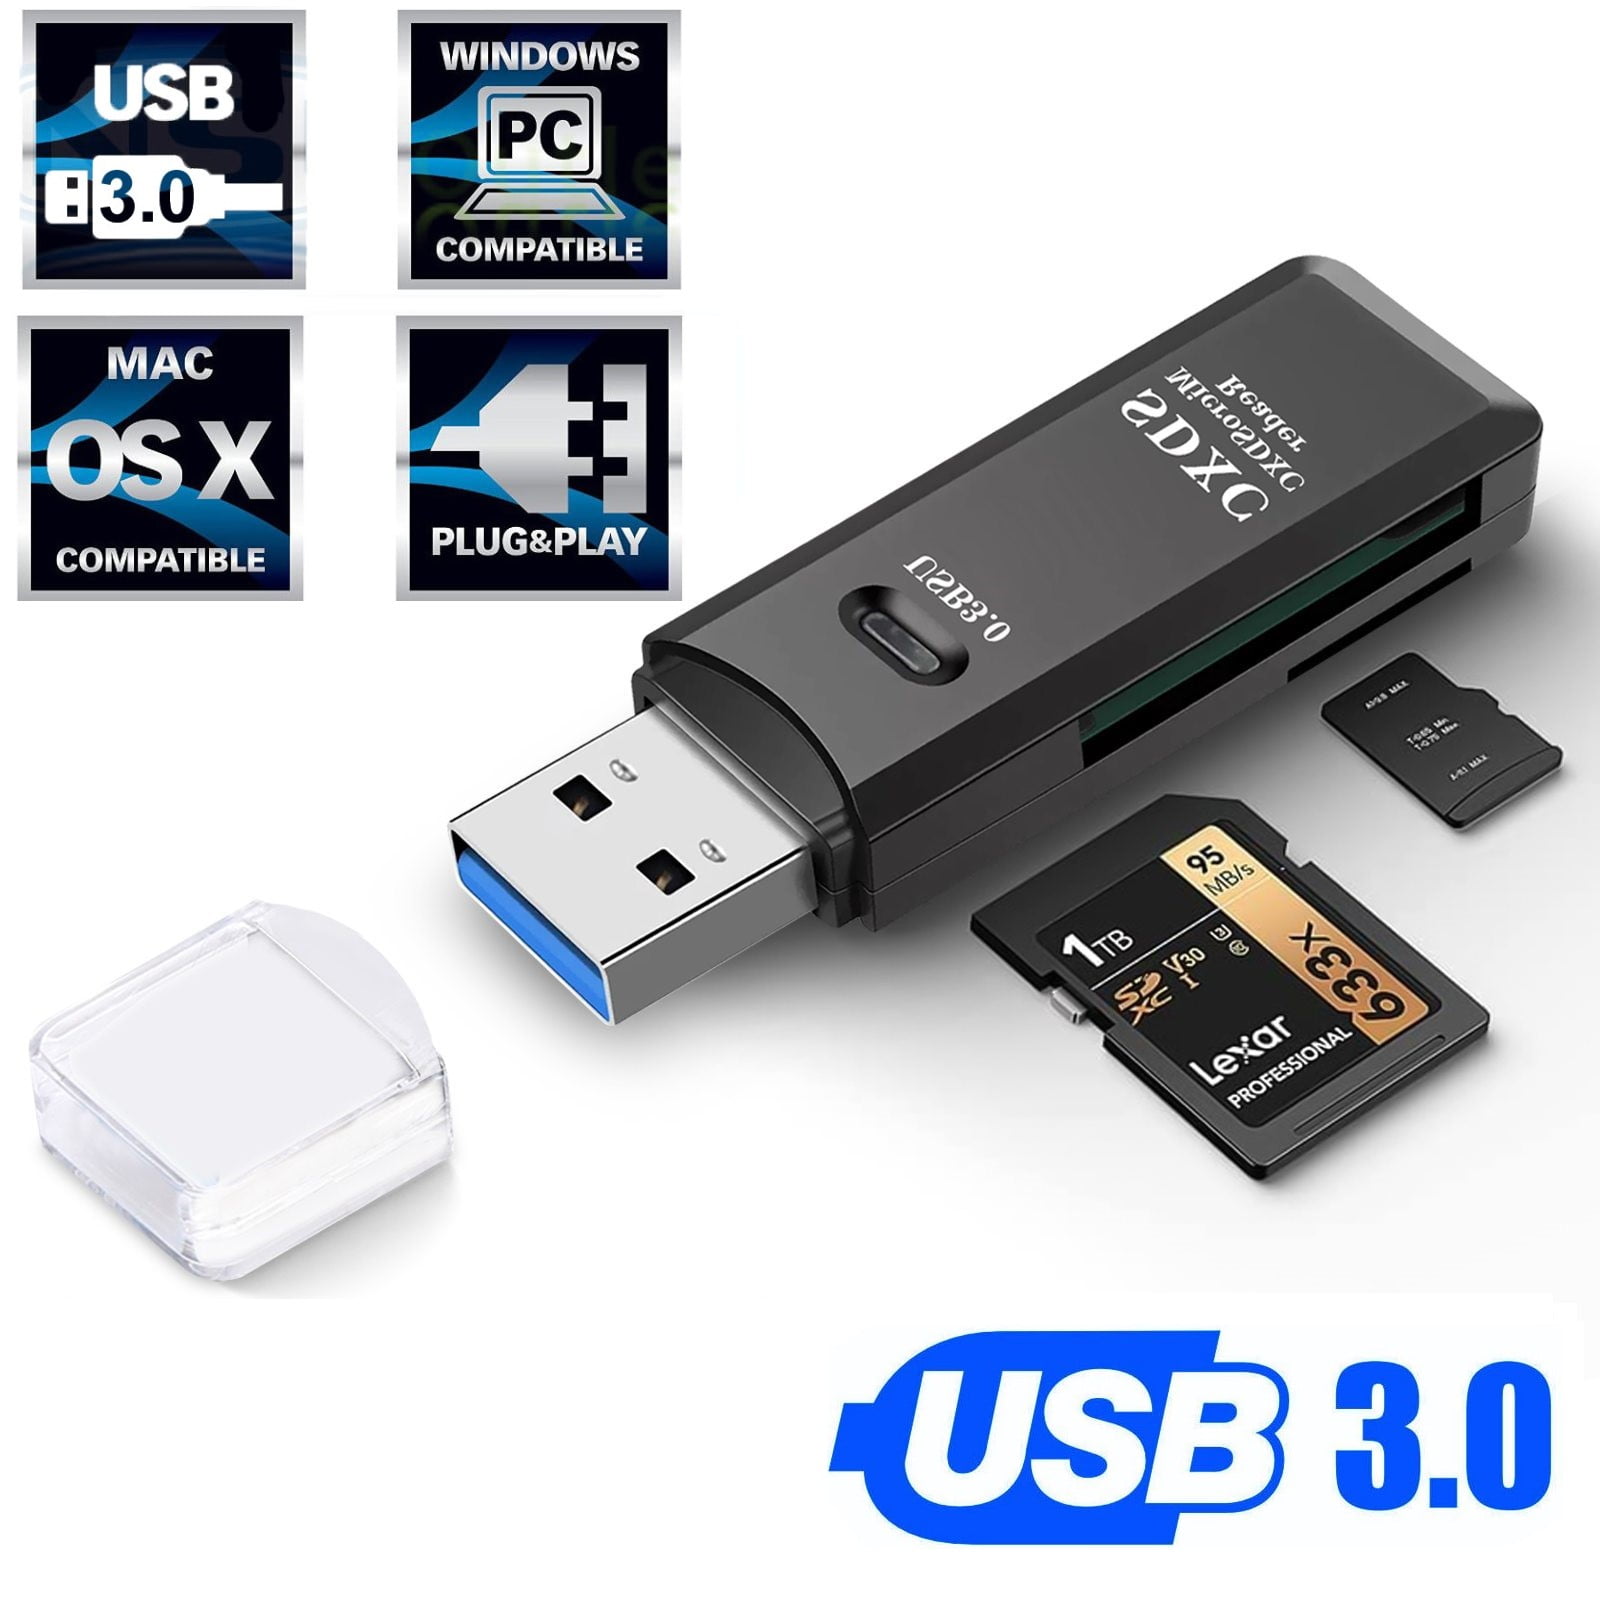 Pidgin Afskedigelse is USB 3.0 SD Card Reader, TSV Multi-Card Reader Memory Card Adapter for SD  SDXC SDHC TF Micro SD Micro SDXC Micro SDHC MMC UHS-I Cards 5Gbps for  Windows Mac Linux - Walmart.com